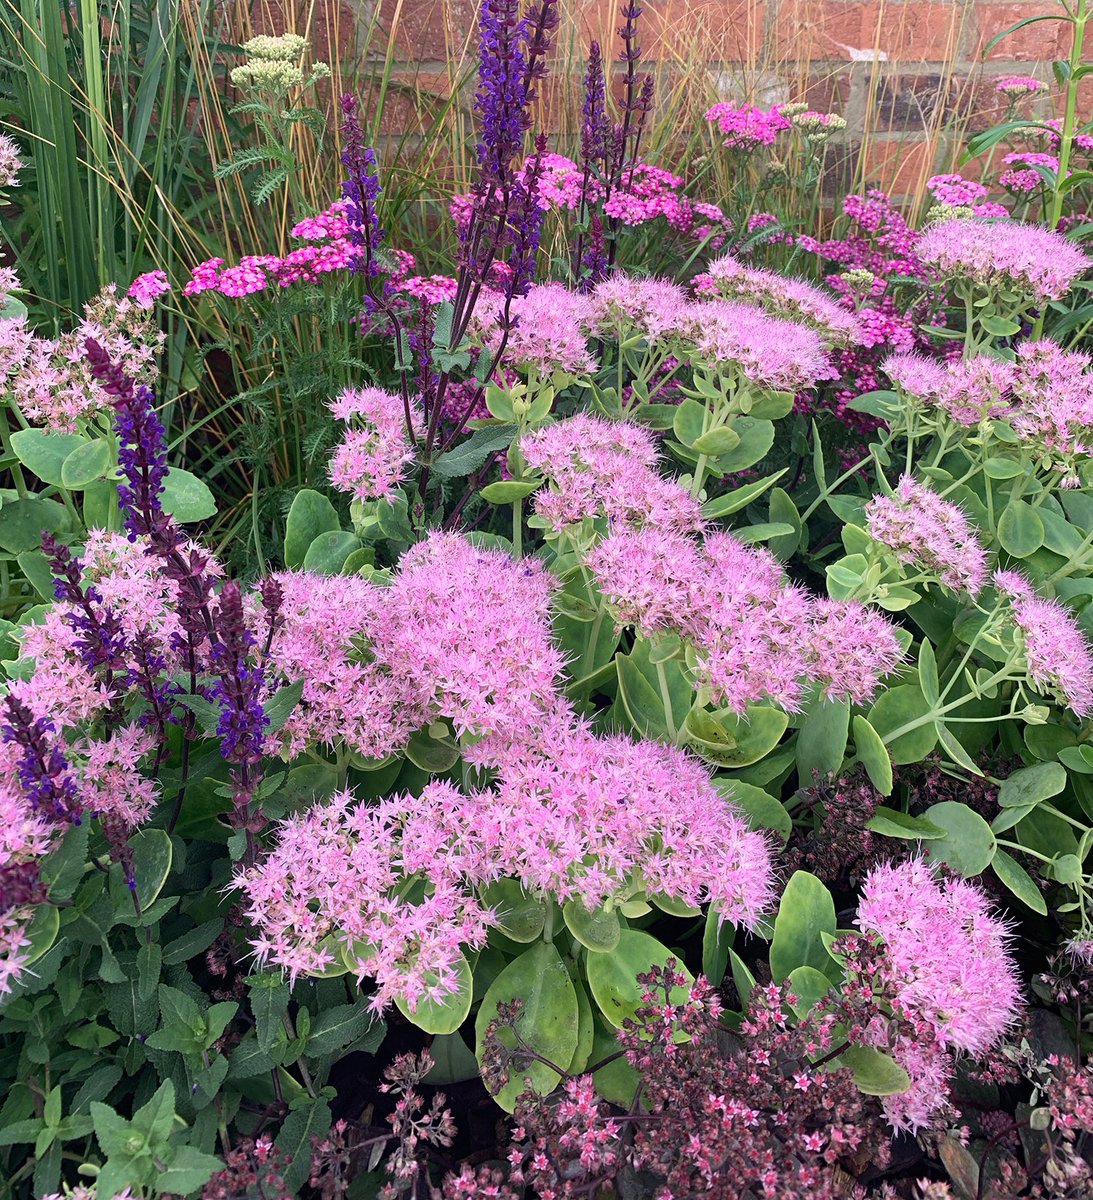 Sedums (Hylotelephium) are a great #herbaceous plant for #bees, flowering now. Committee member @suebeesley recommends dusky purple 'Jose Aubergine'. 'Matrona' is purple, too, and has the #AGM 🏆 but all are bee and butterfly friendly. #bees #pollinators #herbaceous